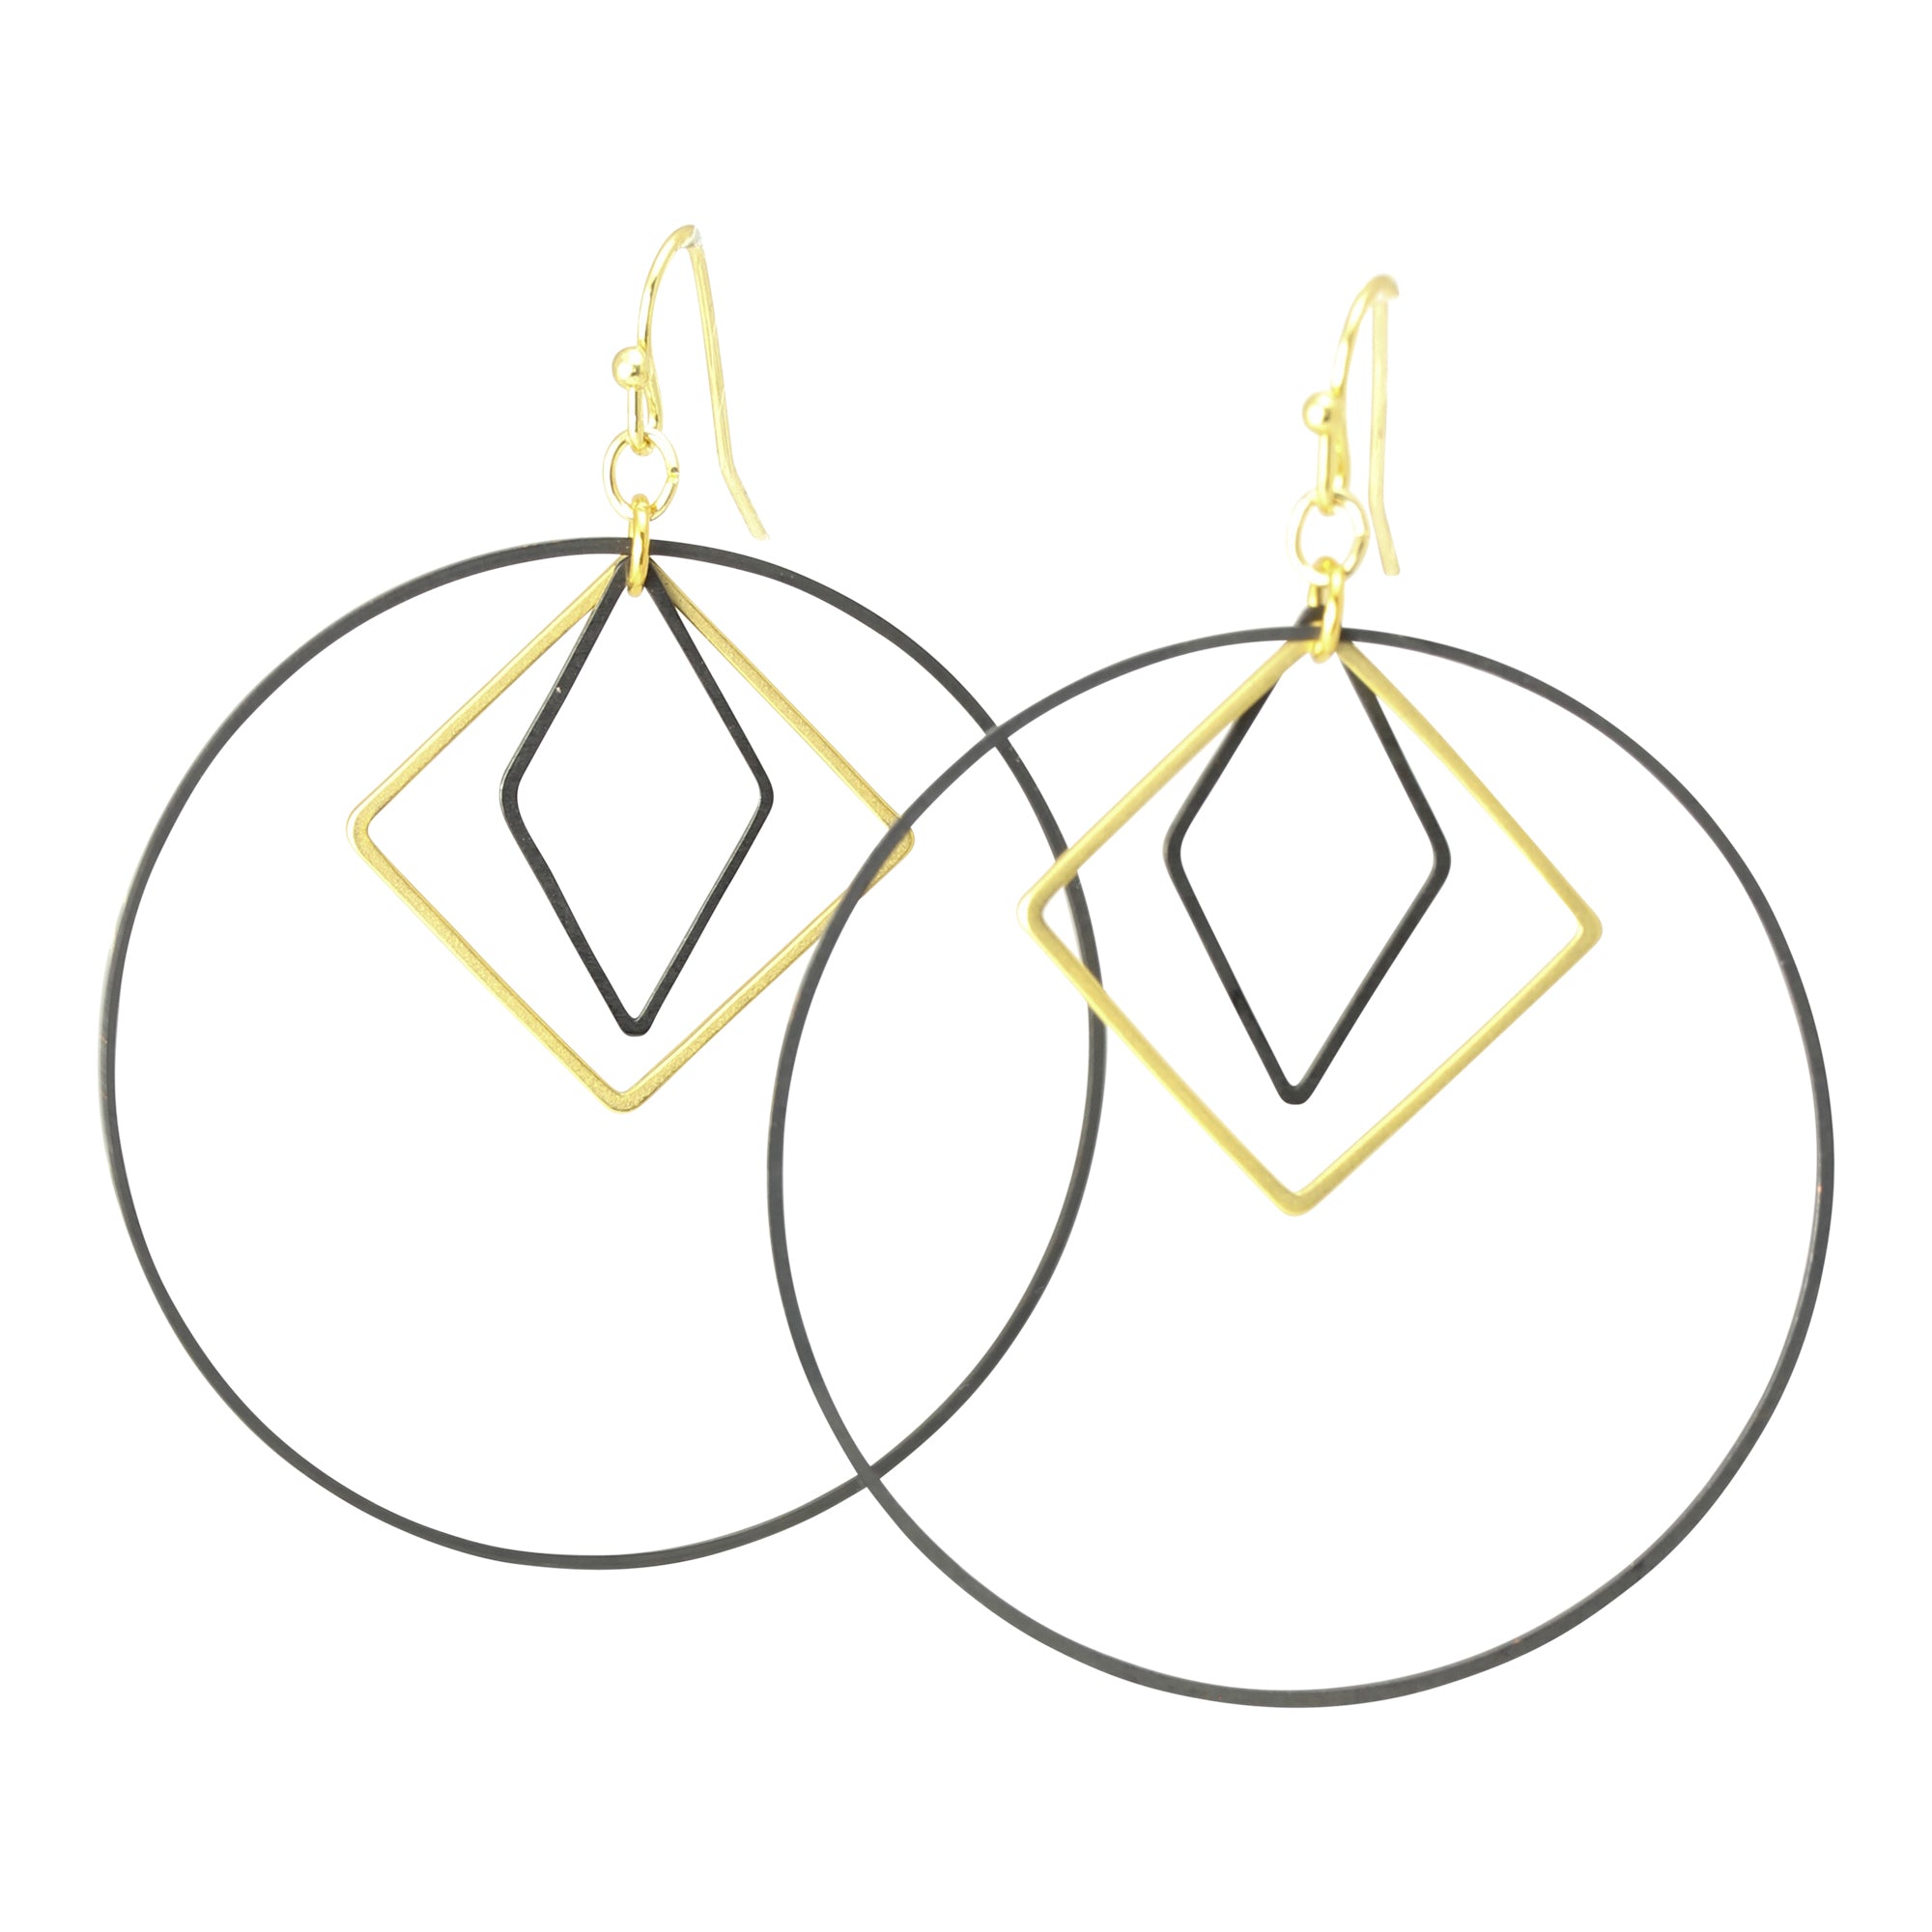 Le Contour Large Luxe Hoops in Matte Black & Gold